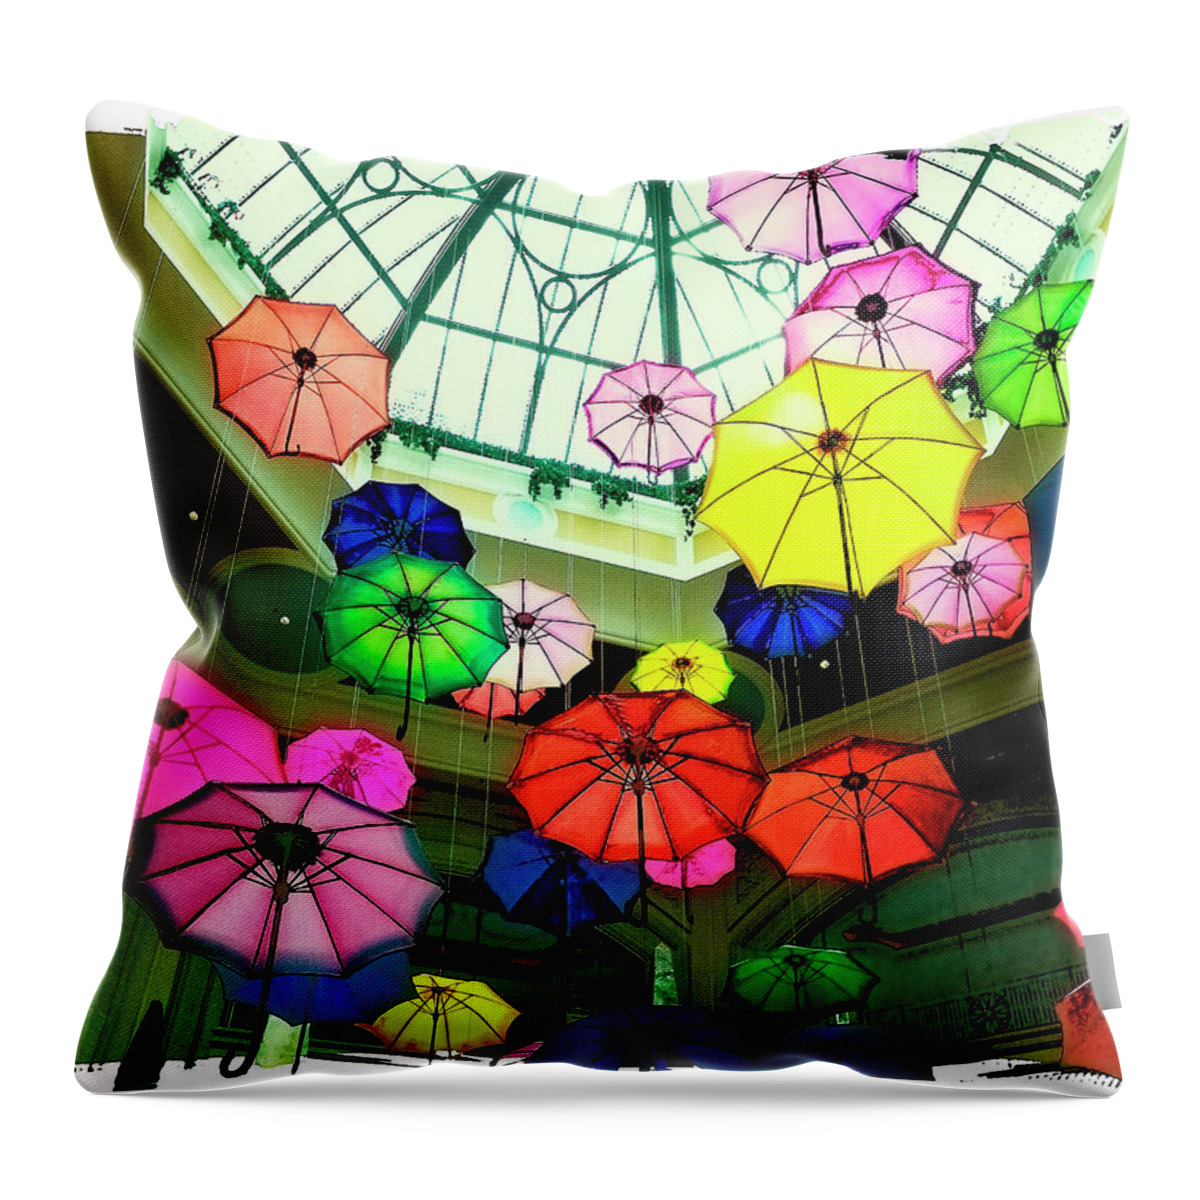 Las Vegas Throw Pillow featuring the photograph Floating Umbrellas In Las Vegas by Susan Stone